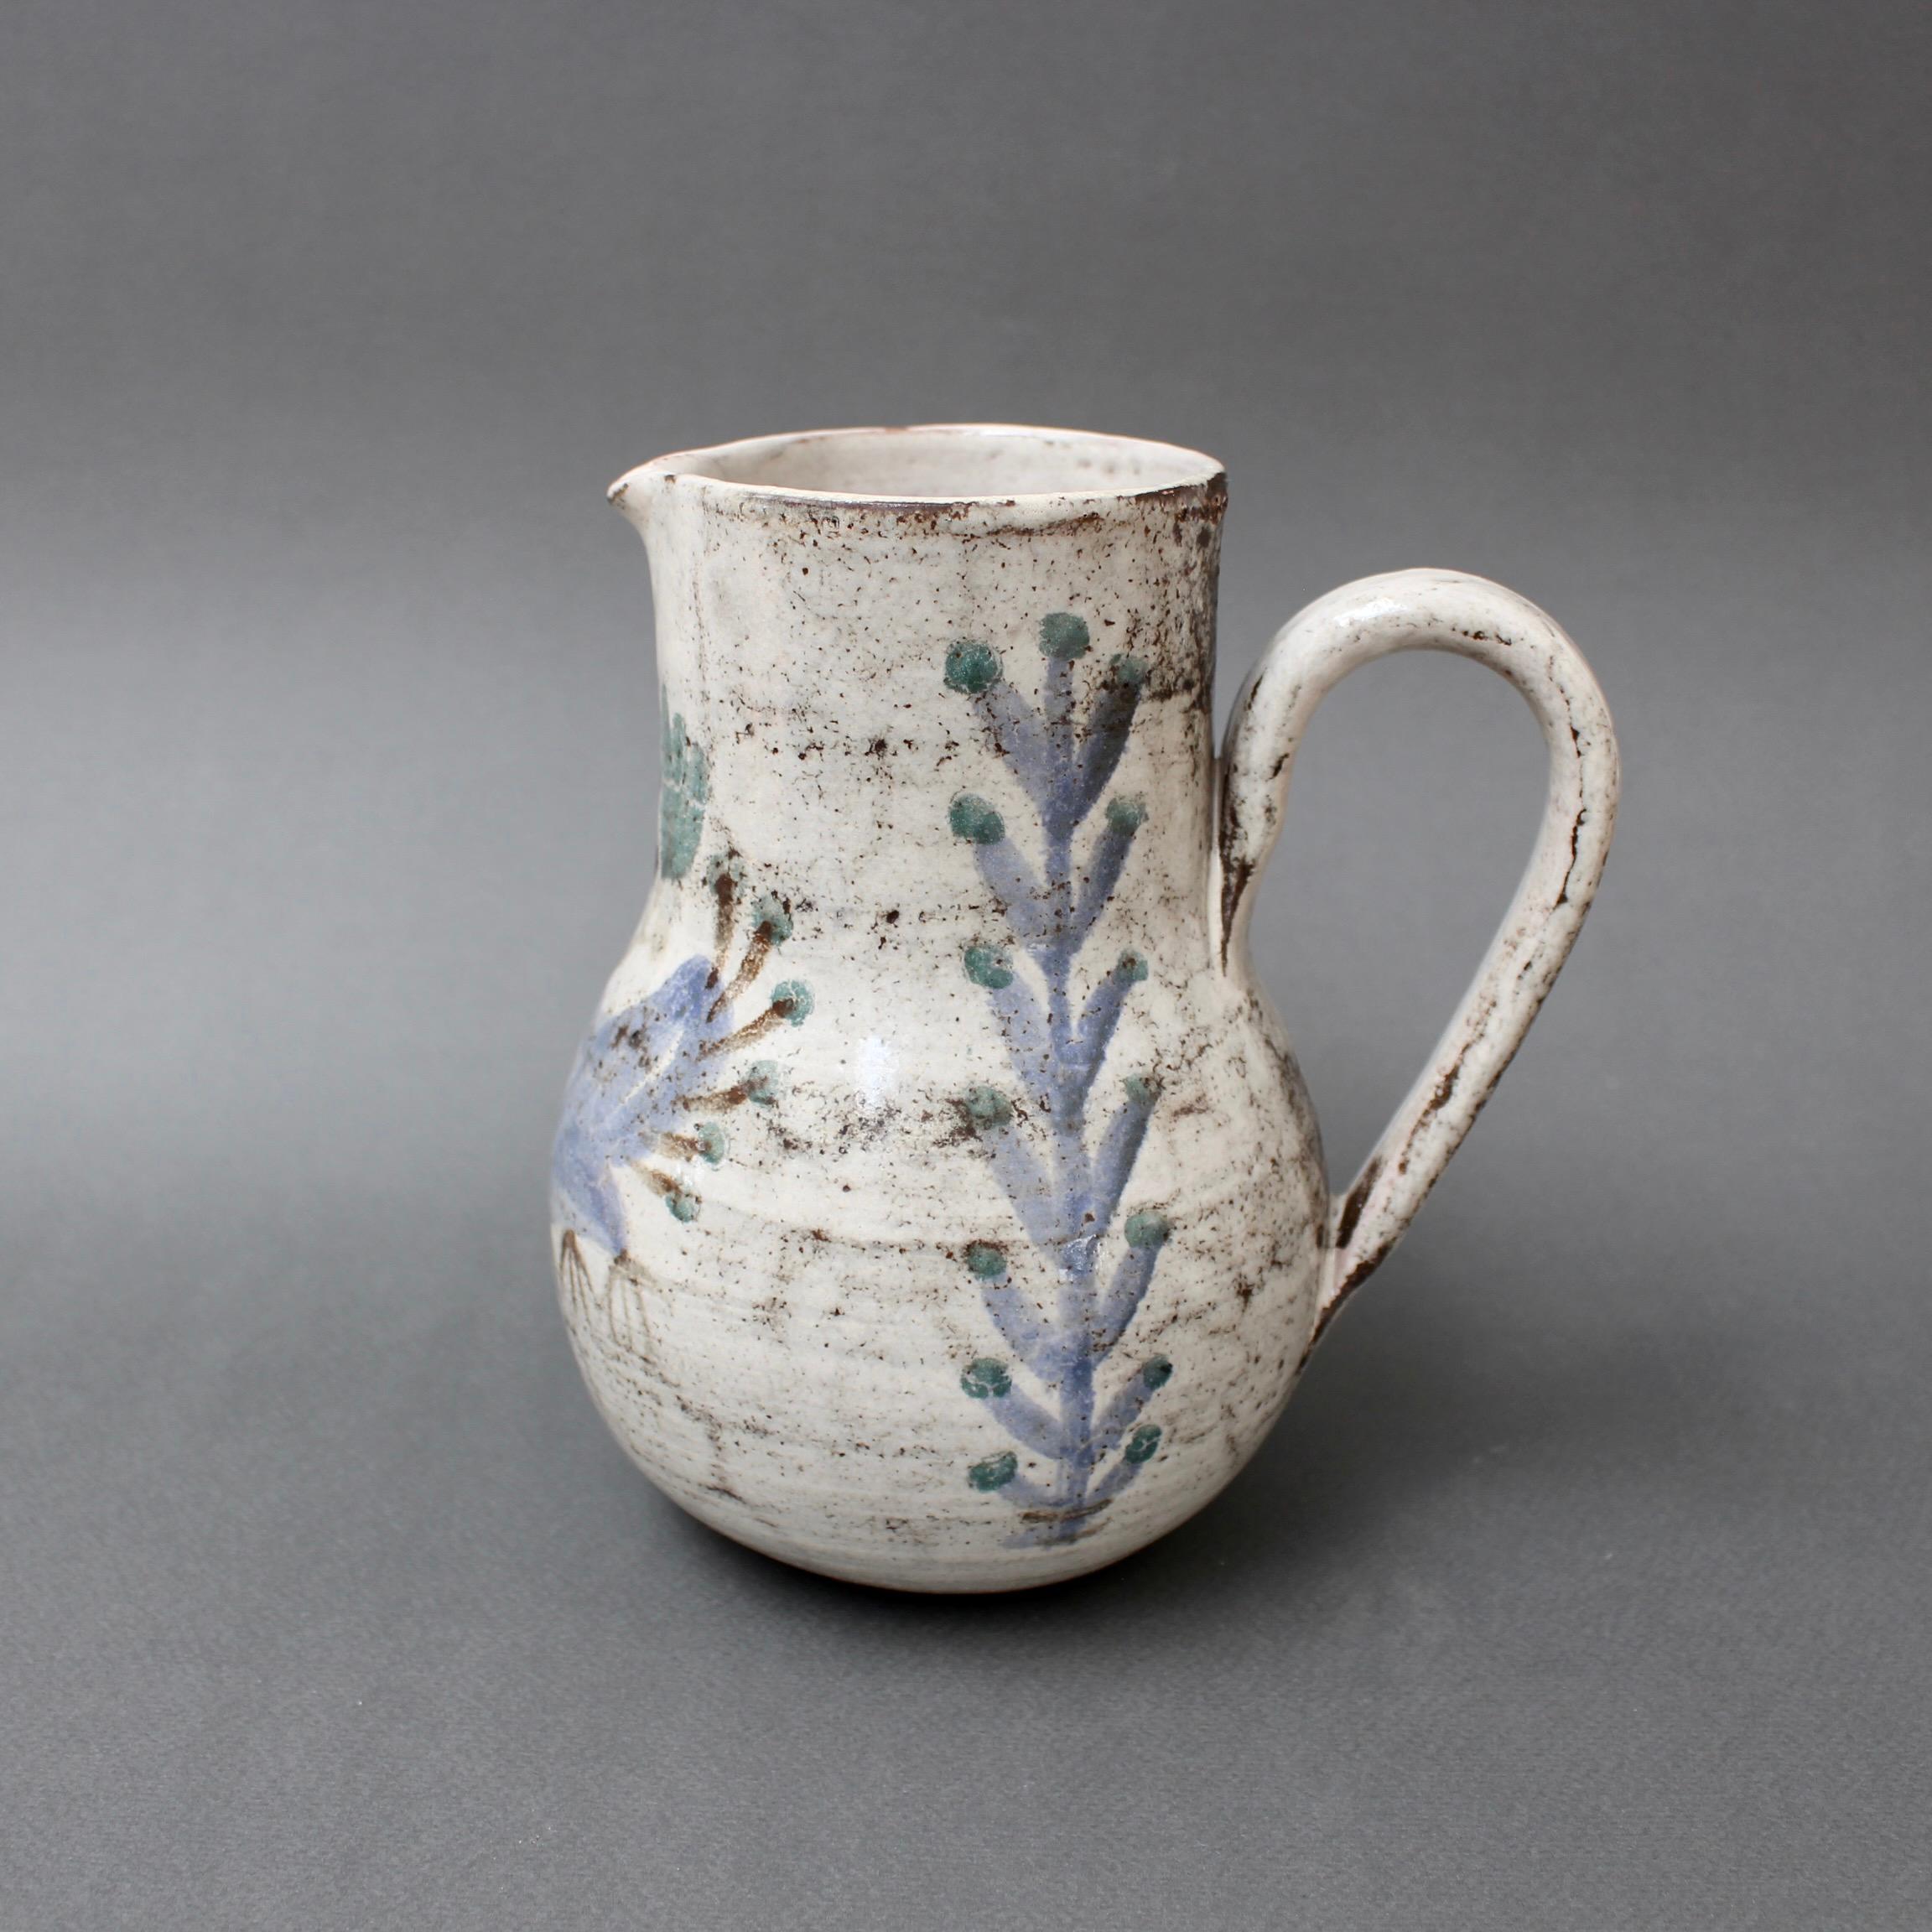 Hand-Painted Vintage French Ceramic Pitcher by Gustave Reynaud, Le Mûrier 'circa 1960s'